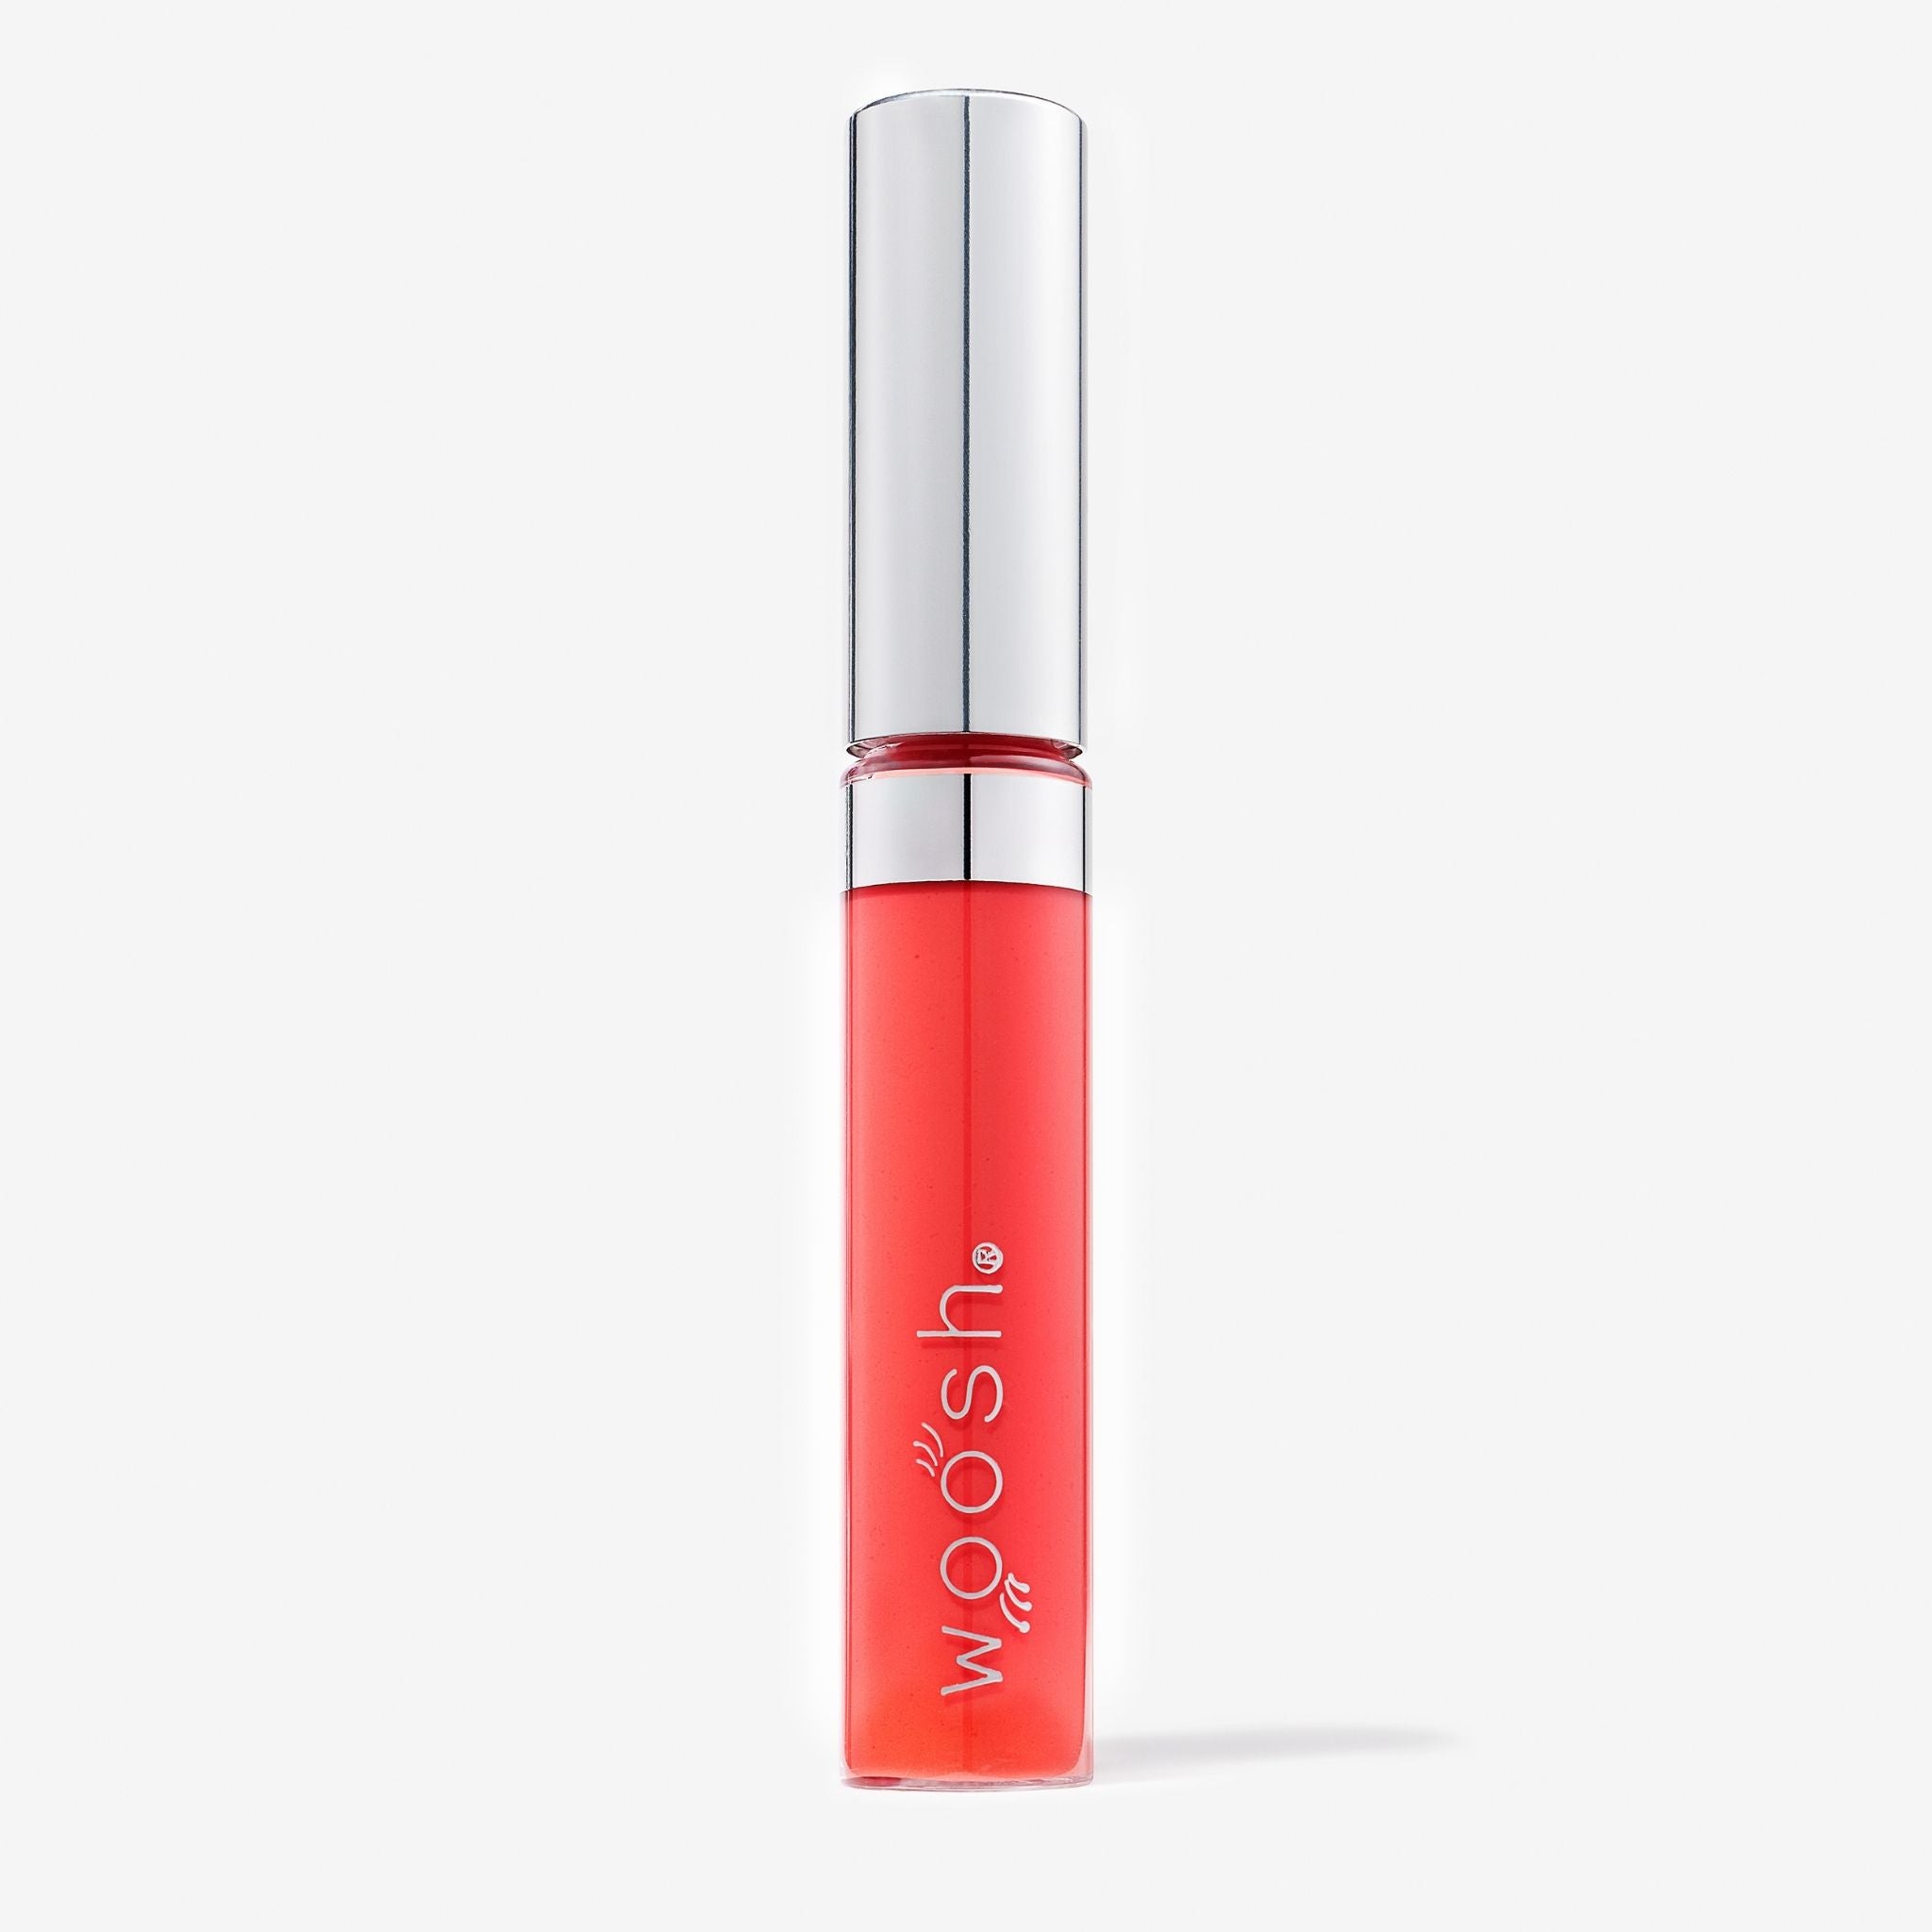 New shade splash is a bright coral shade infused with shea butter and hyaluronic acid.